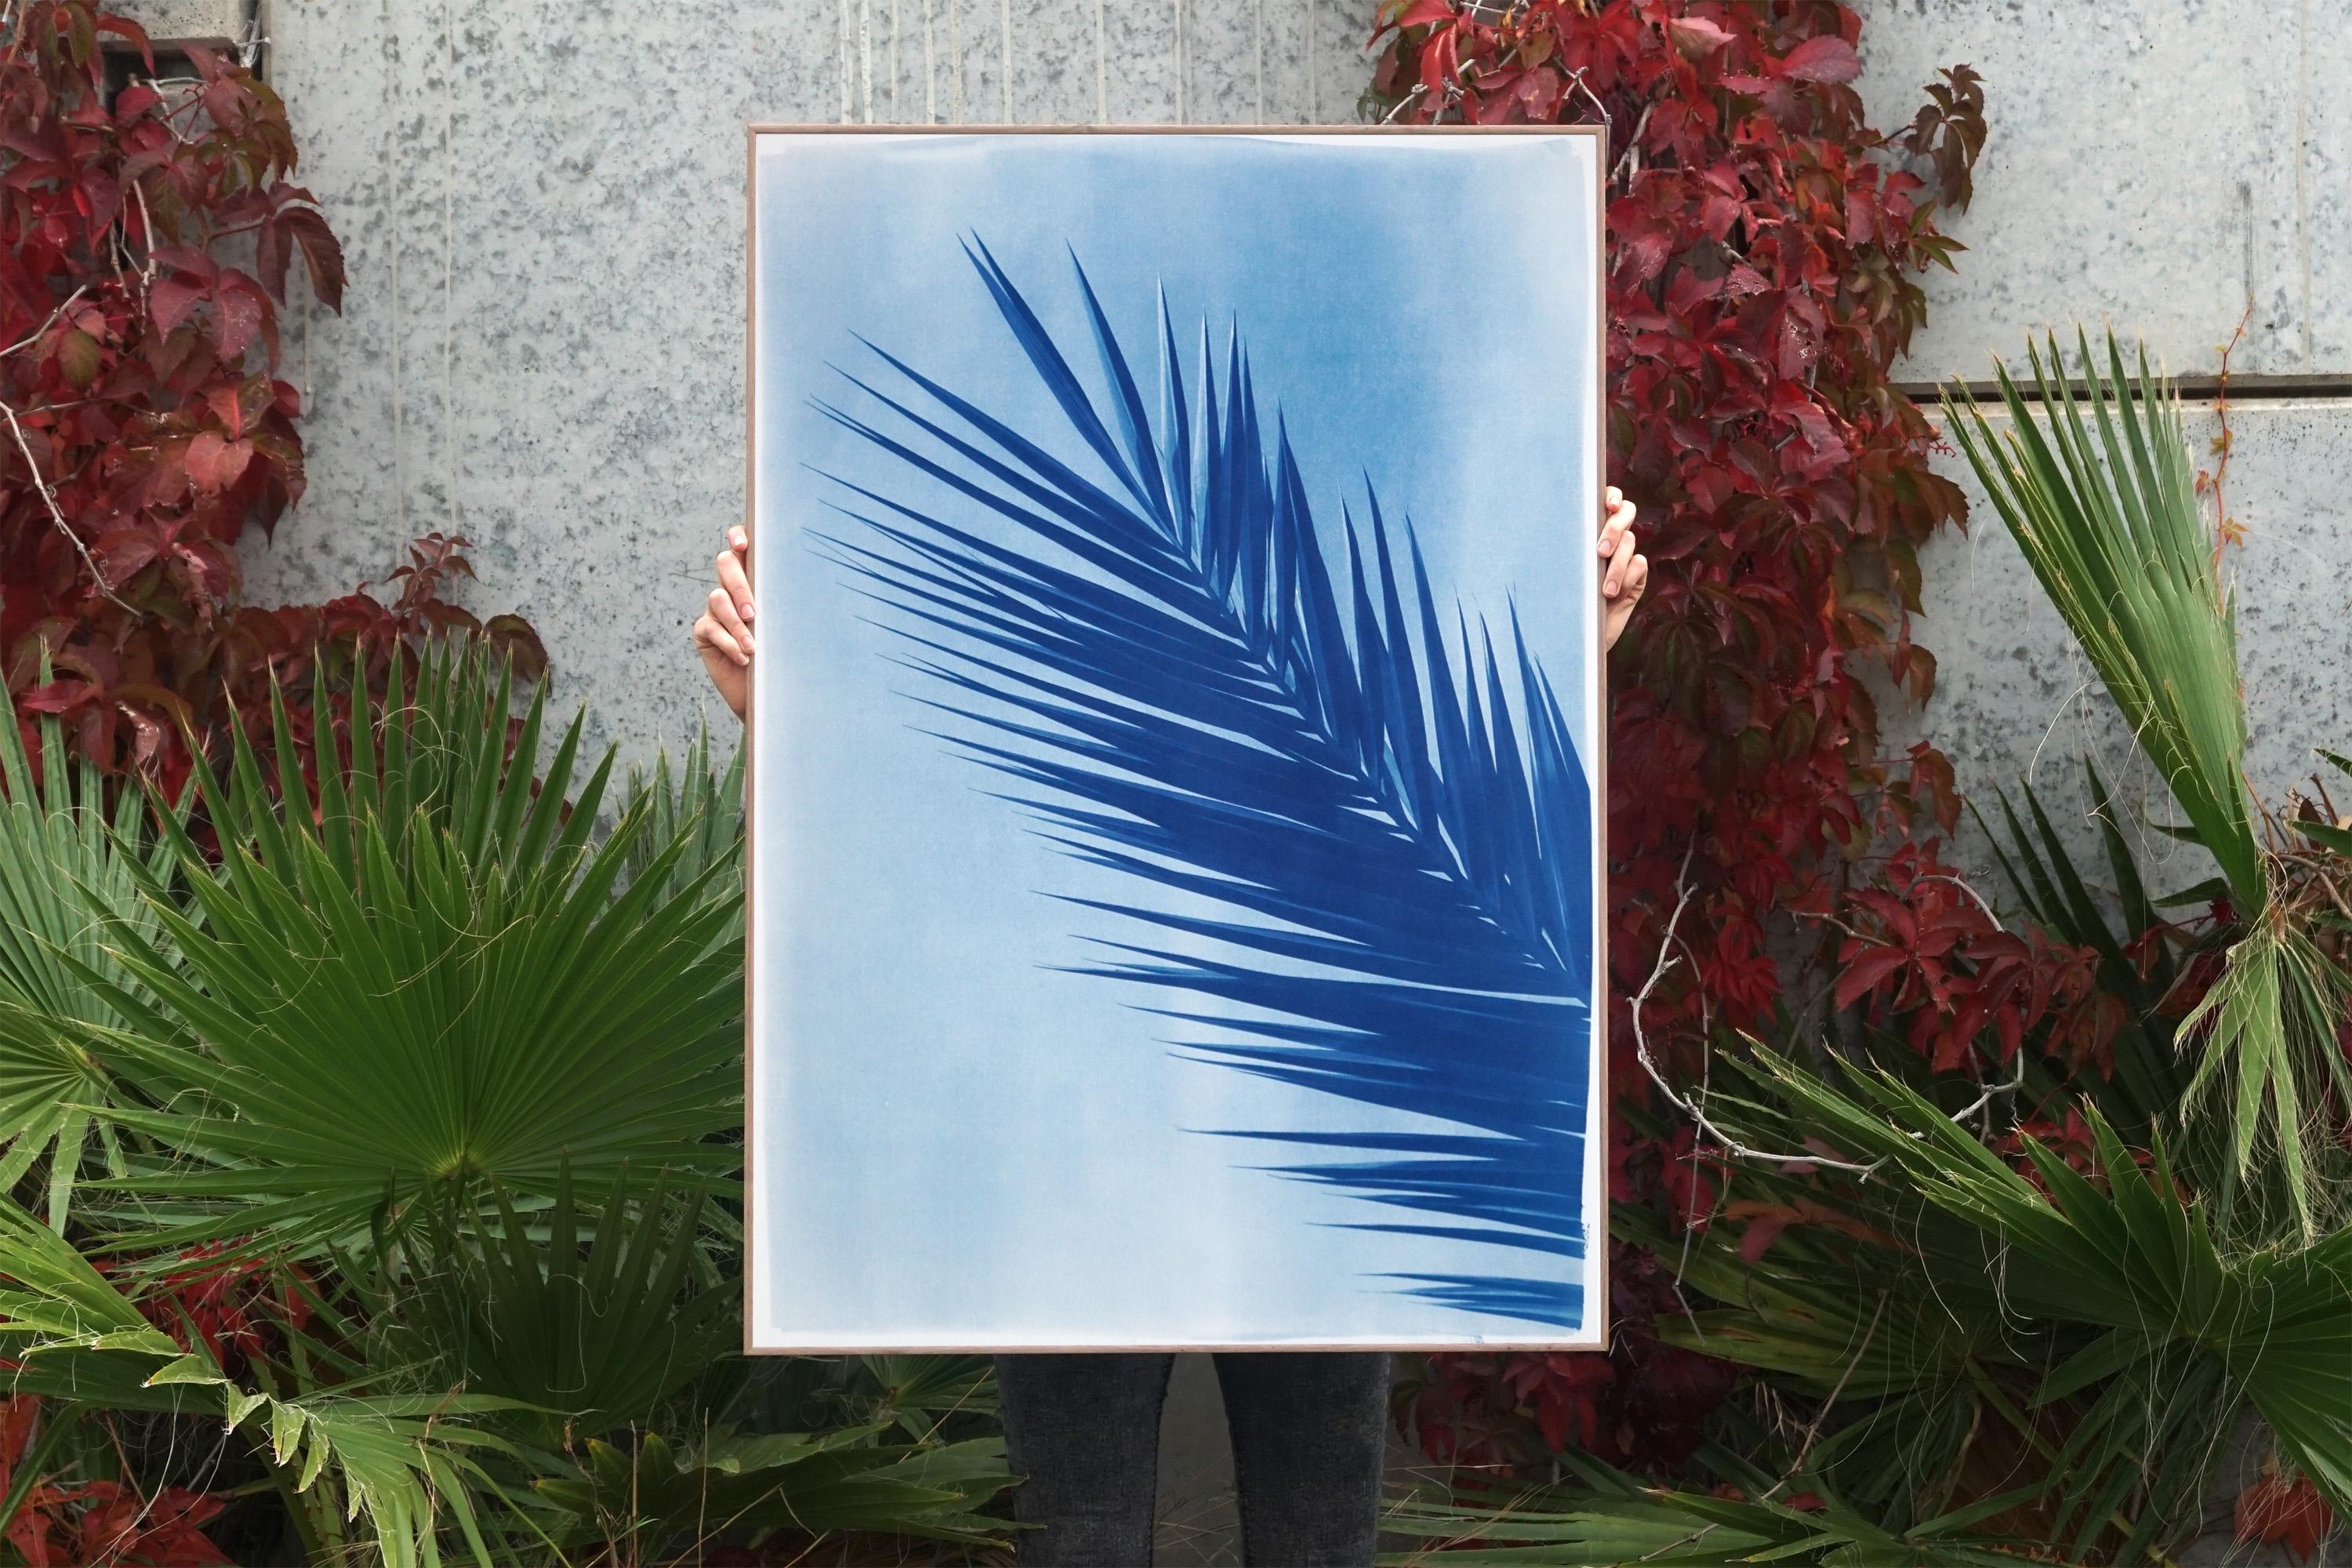 This is an exclusive handprinted limited edition cyanotype of a beautiful Palm Tree Leaf.

Details:
+ Title: Palm Tree Leaf Over Blue Sky
+ Year: 2021
+ Edition Size: 100
+ Stamped and Certificate of Authenticity provided
+ Measurements : 70x100 cm